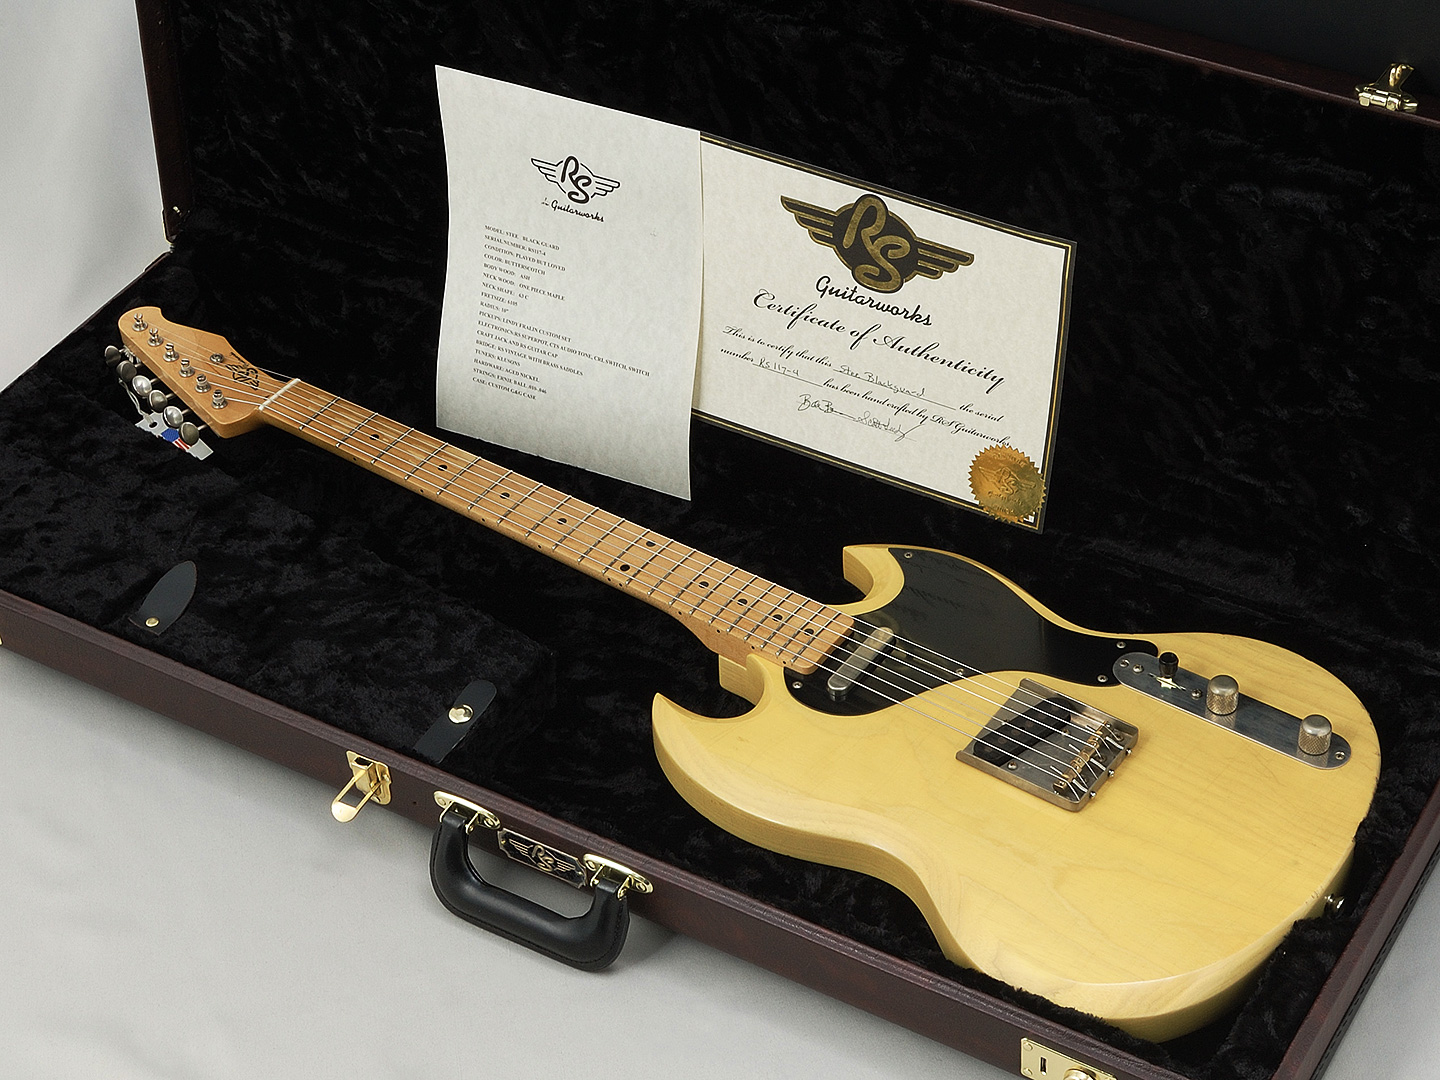 RS Guitarworks STee Blackguard II/Butter Scotch/Played But Loved